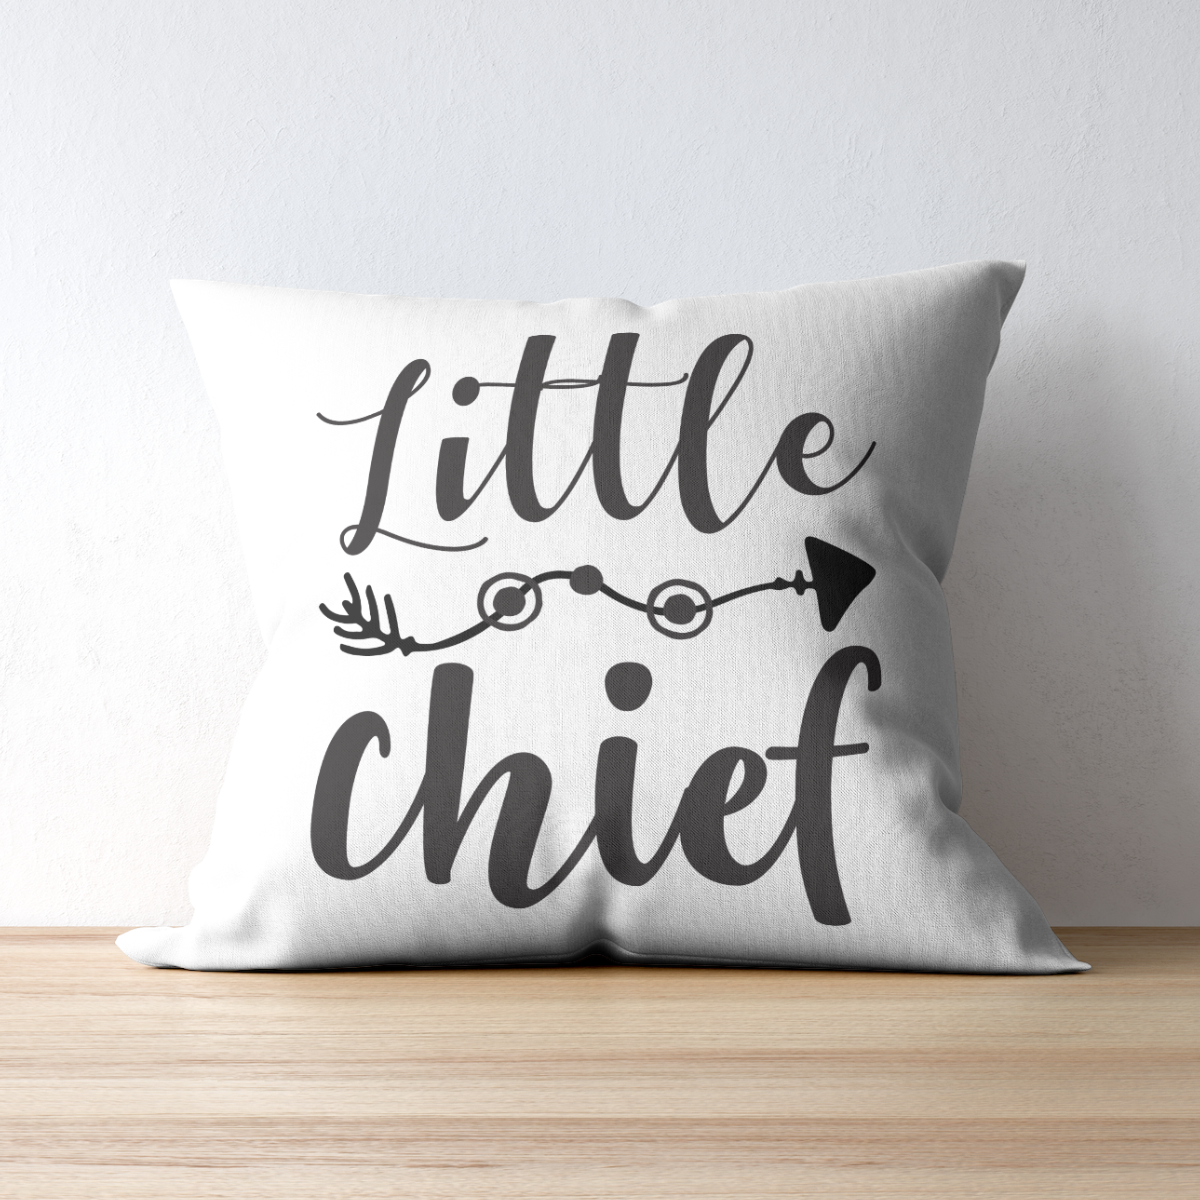 Little Chief SVG | Digital Download | Cut File | SVG - Only The Sweet Stuff